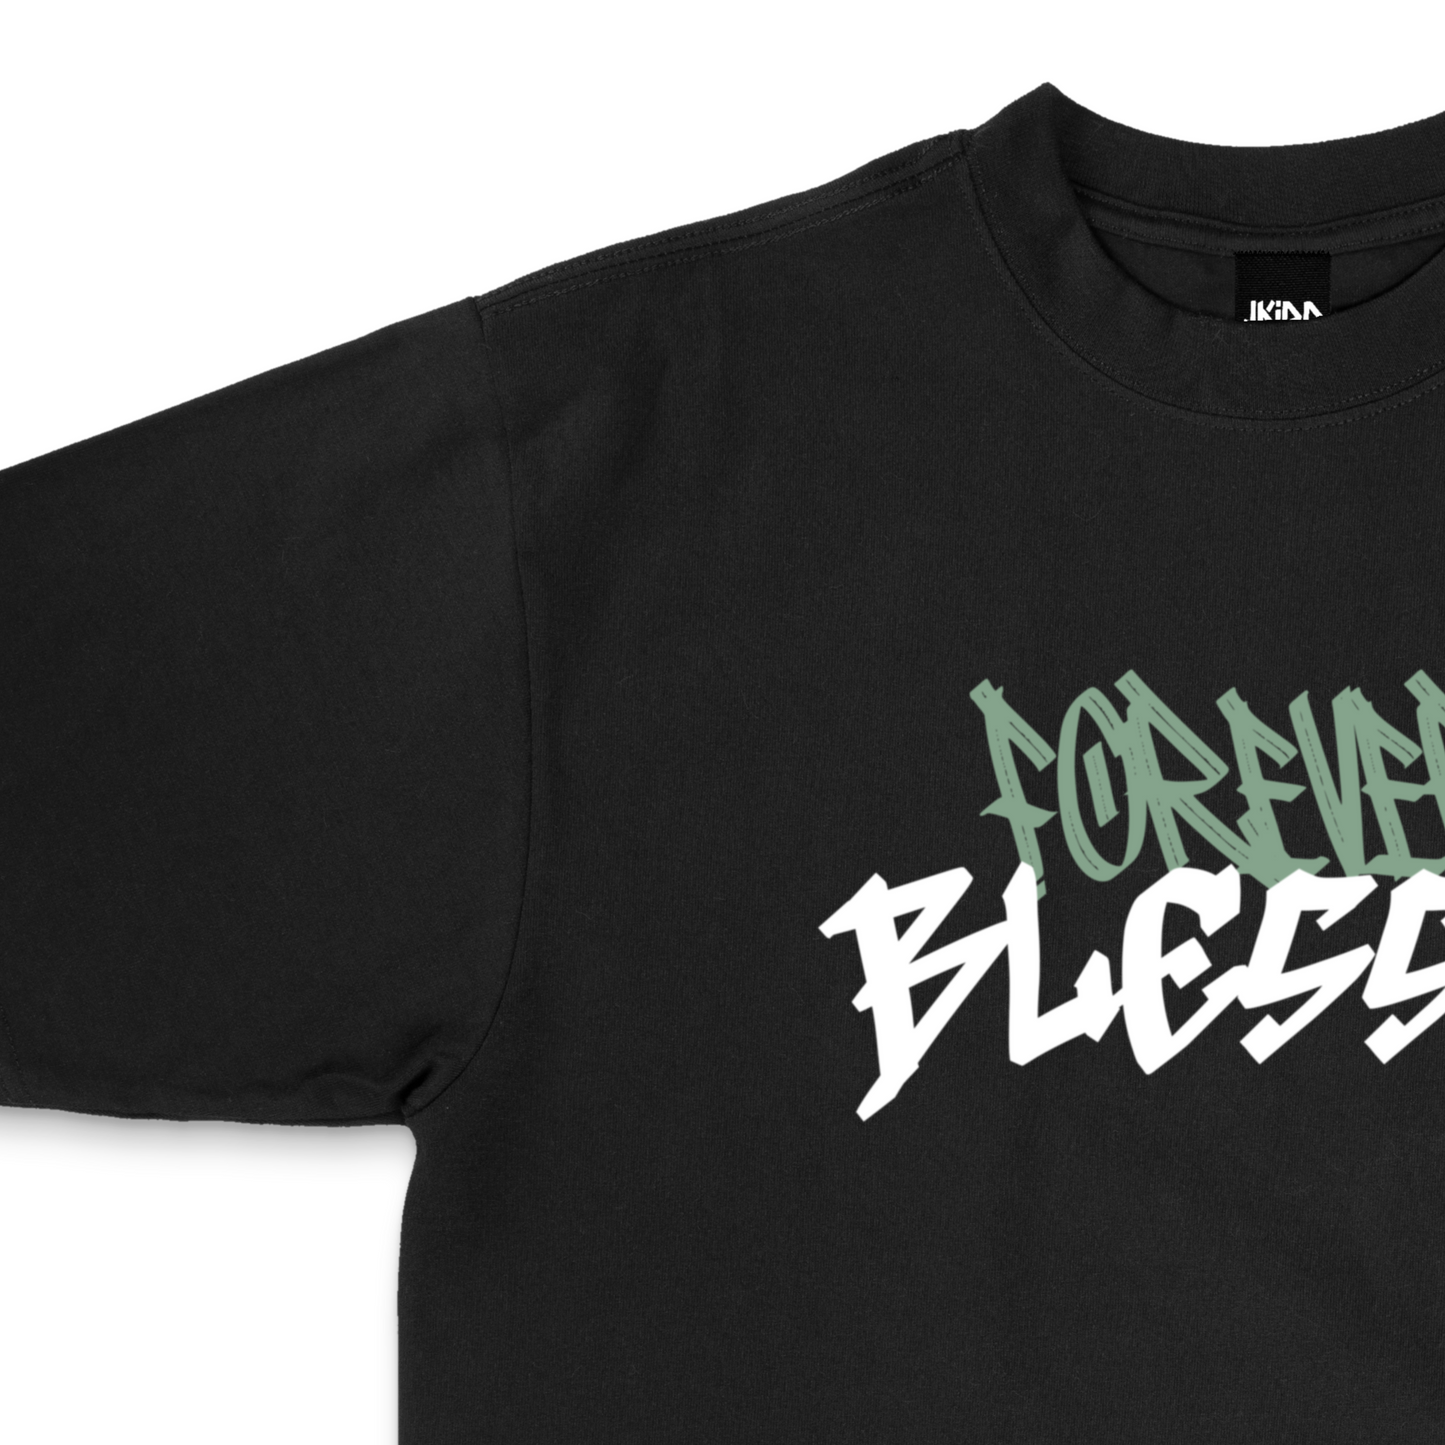 Forever Blessed Tee